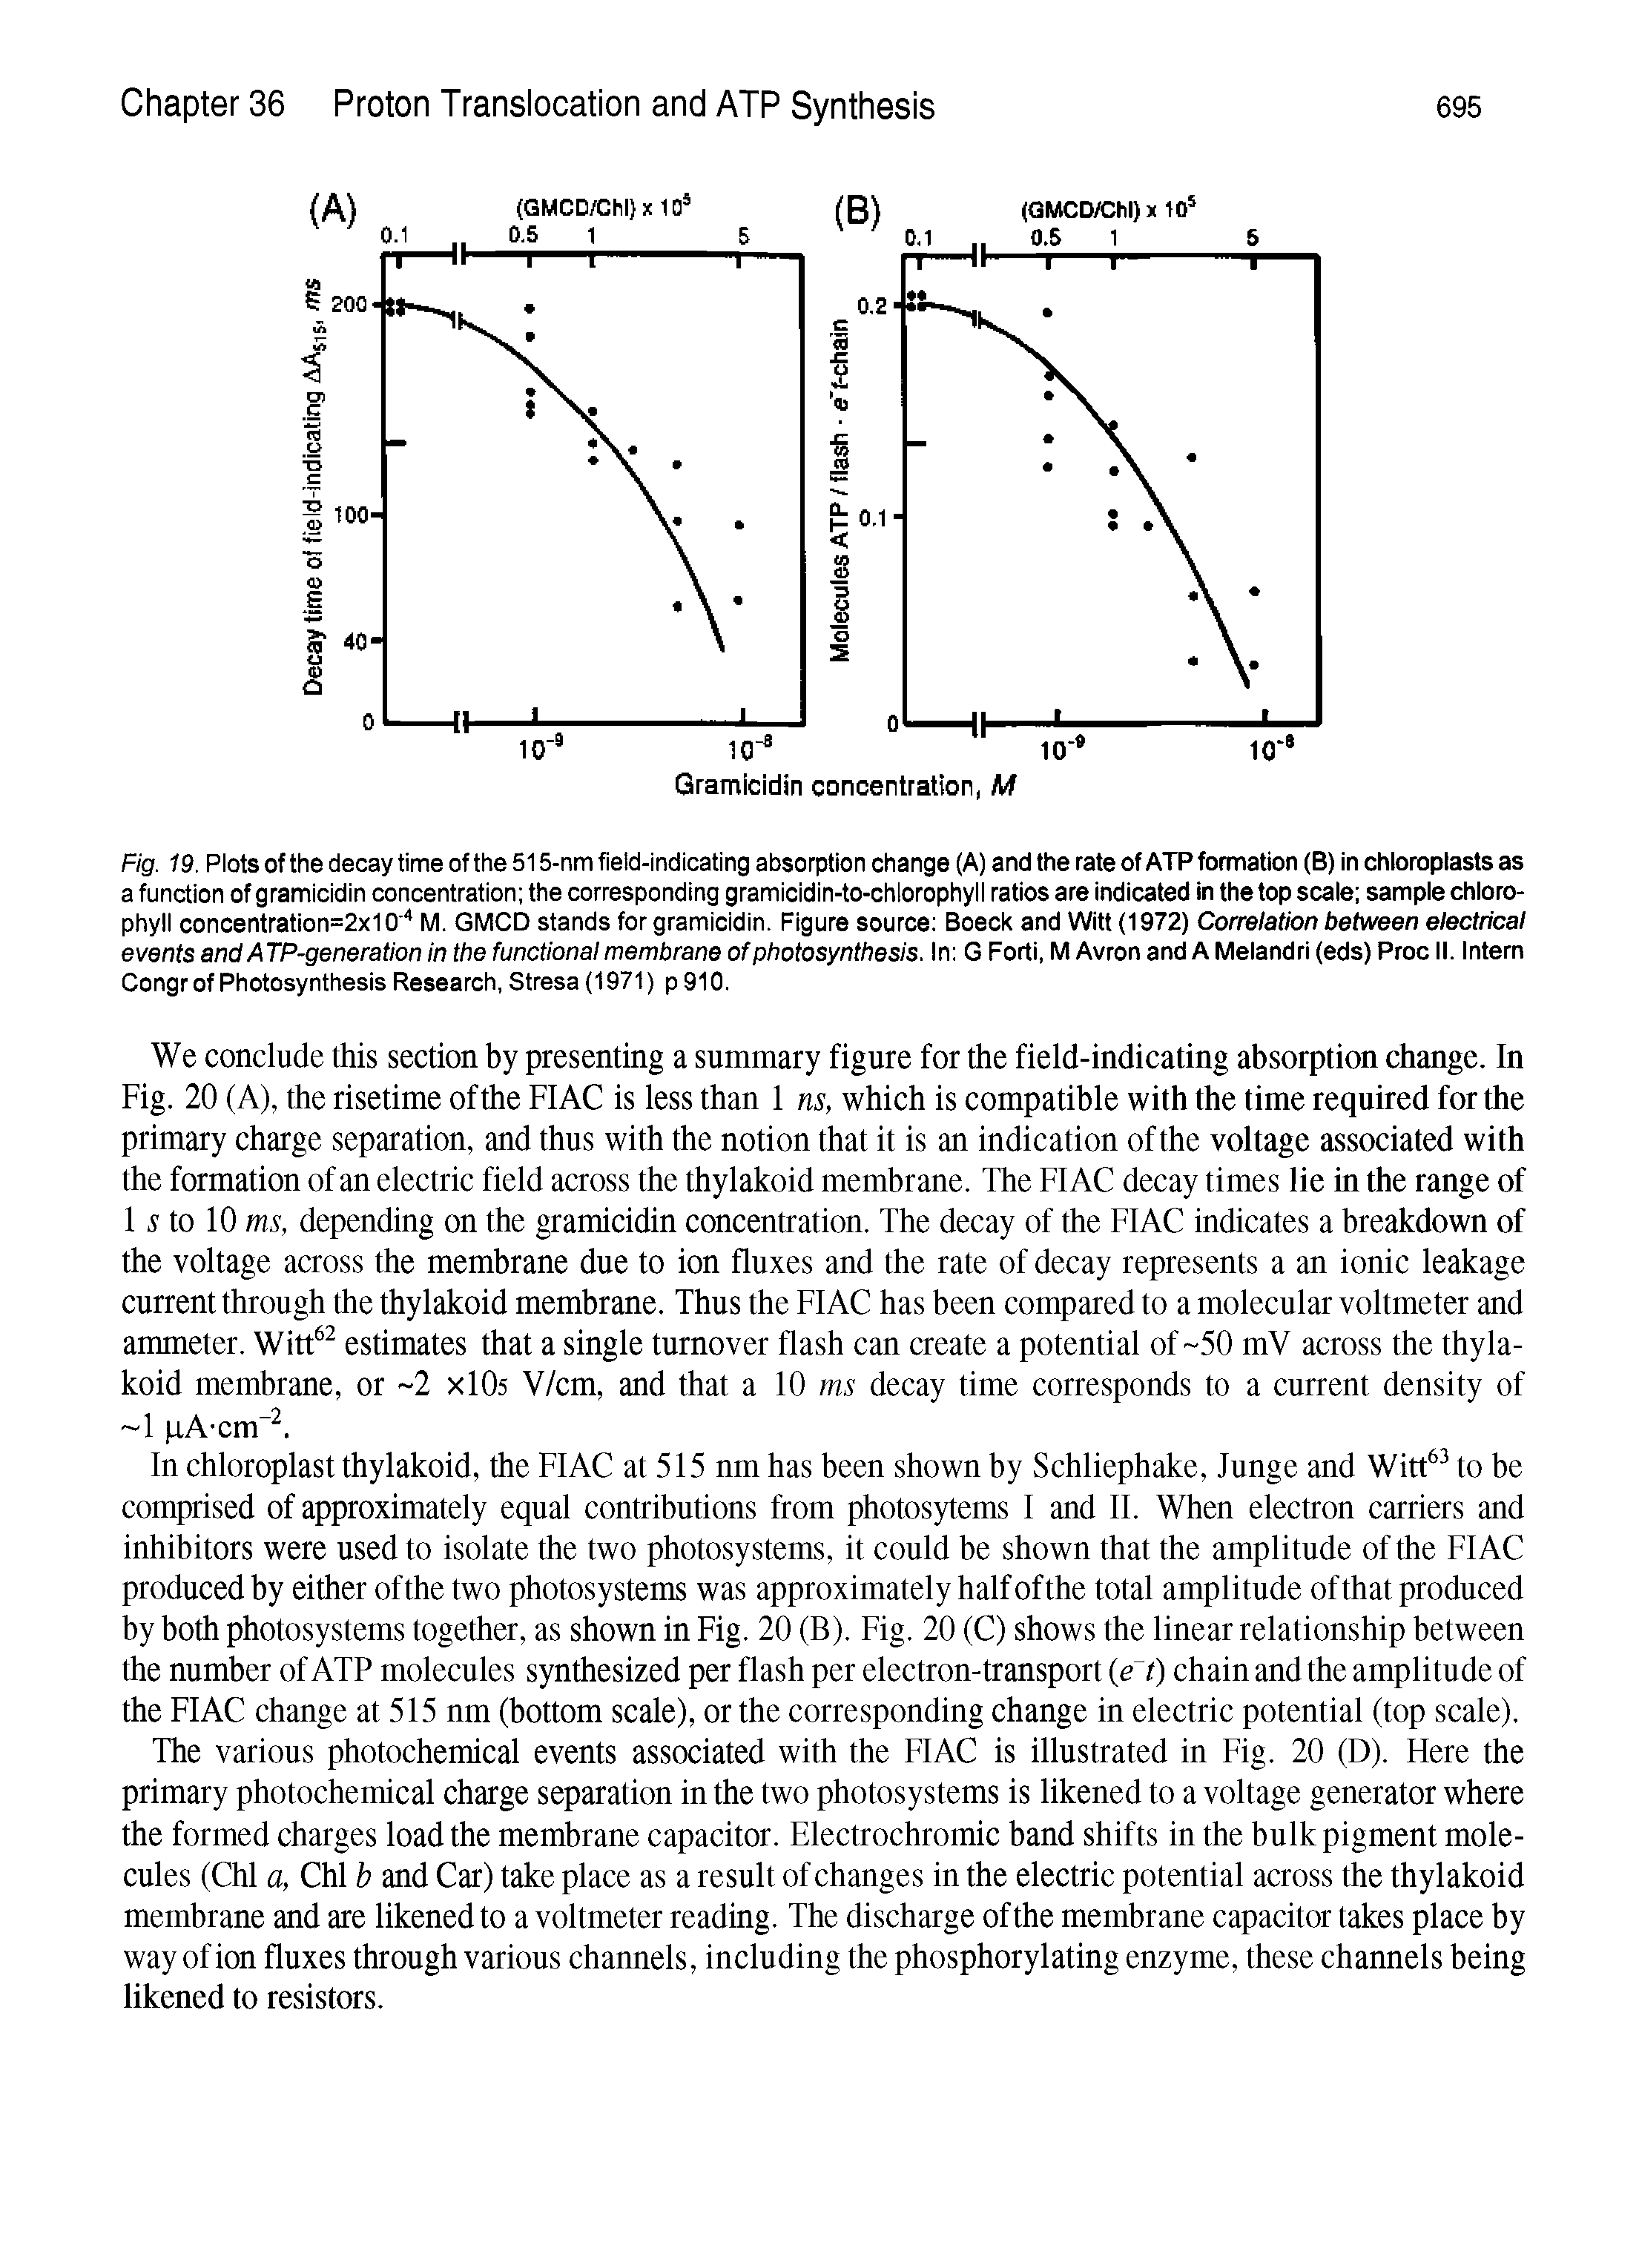 Fig. 19. Plots of the decay time of the 515-nm field-indicating absorption change (A) and the rate of ATP formation (B) in chloroplasts as a function of gramicidin concentration the corresponding gramicidin-to-chlorophyll ratios are indicated in the top scaie sampie chioro-phyll concentration=2x10 M. GMCD stands for gramicidin. Figure source Boeck and Witt (1972) Correlation between electrical events and ATP-generation in the functional membrane of photosynthesis. In G Forti, M Avron and A Melandri (eds) Proc II. Intern Congr of Photosynthesis Research, Stresa (1971) p 910.